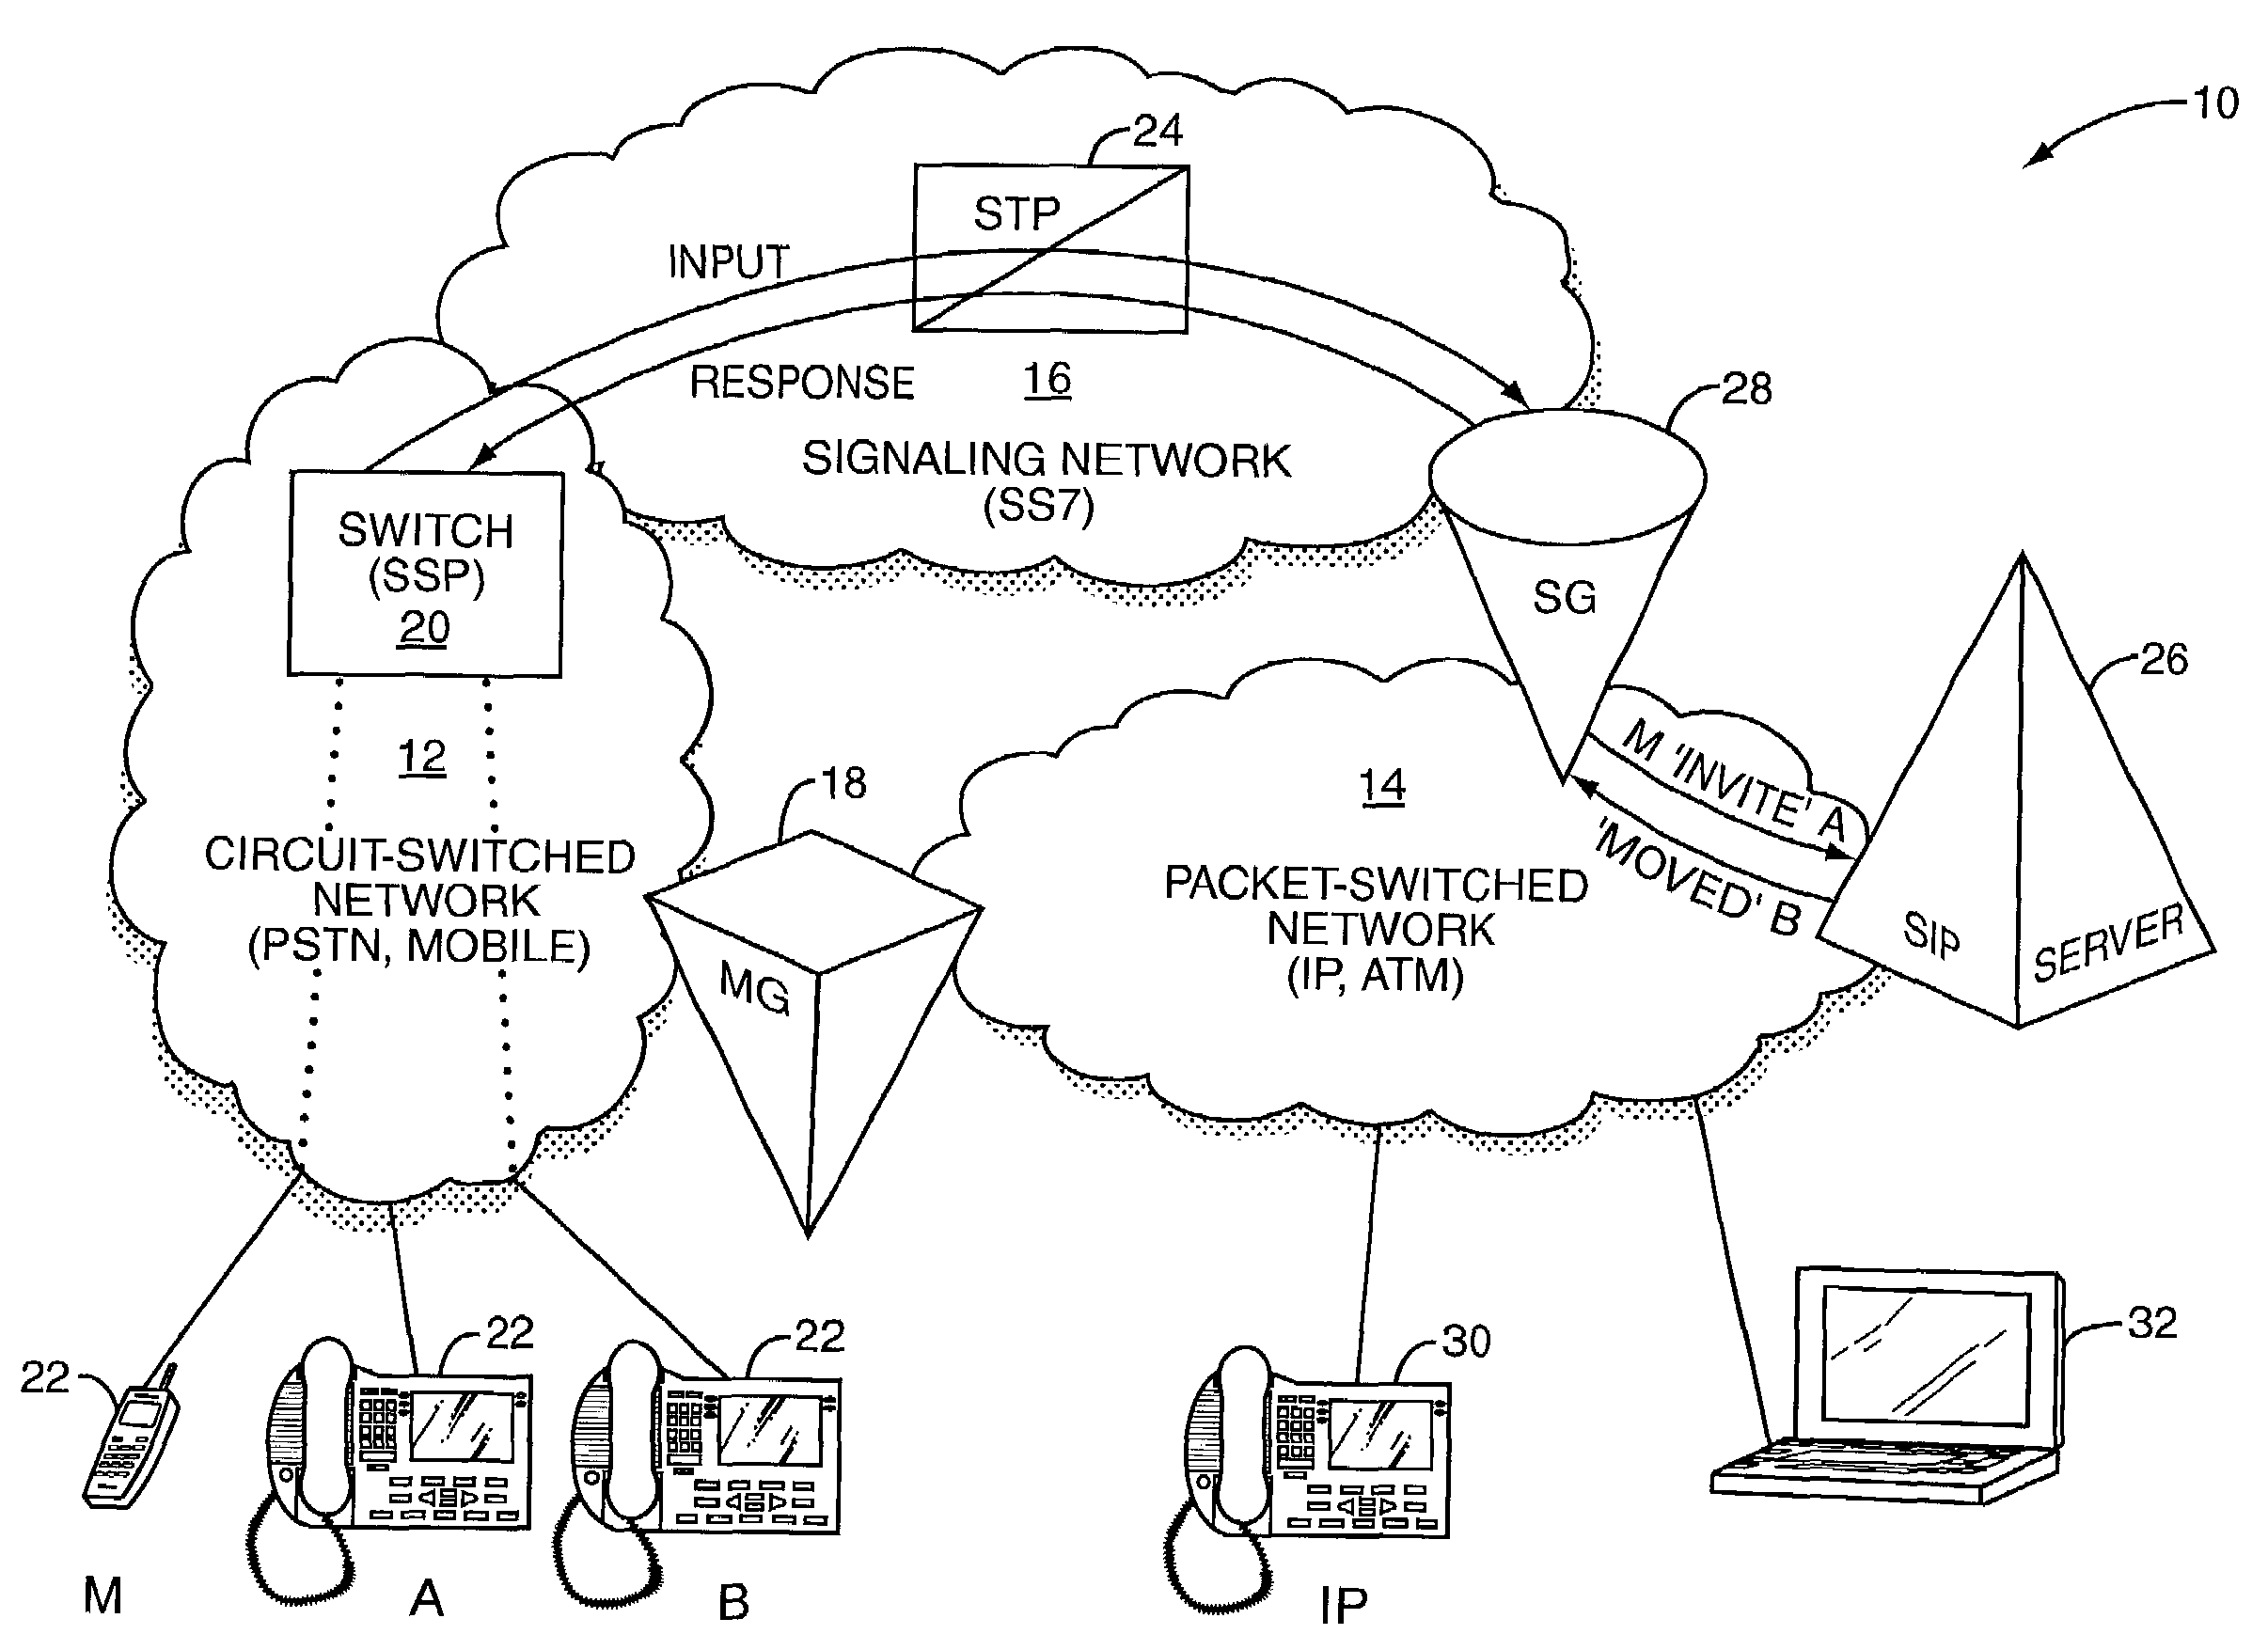 Transaction management for interworking between disparate networks